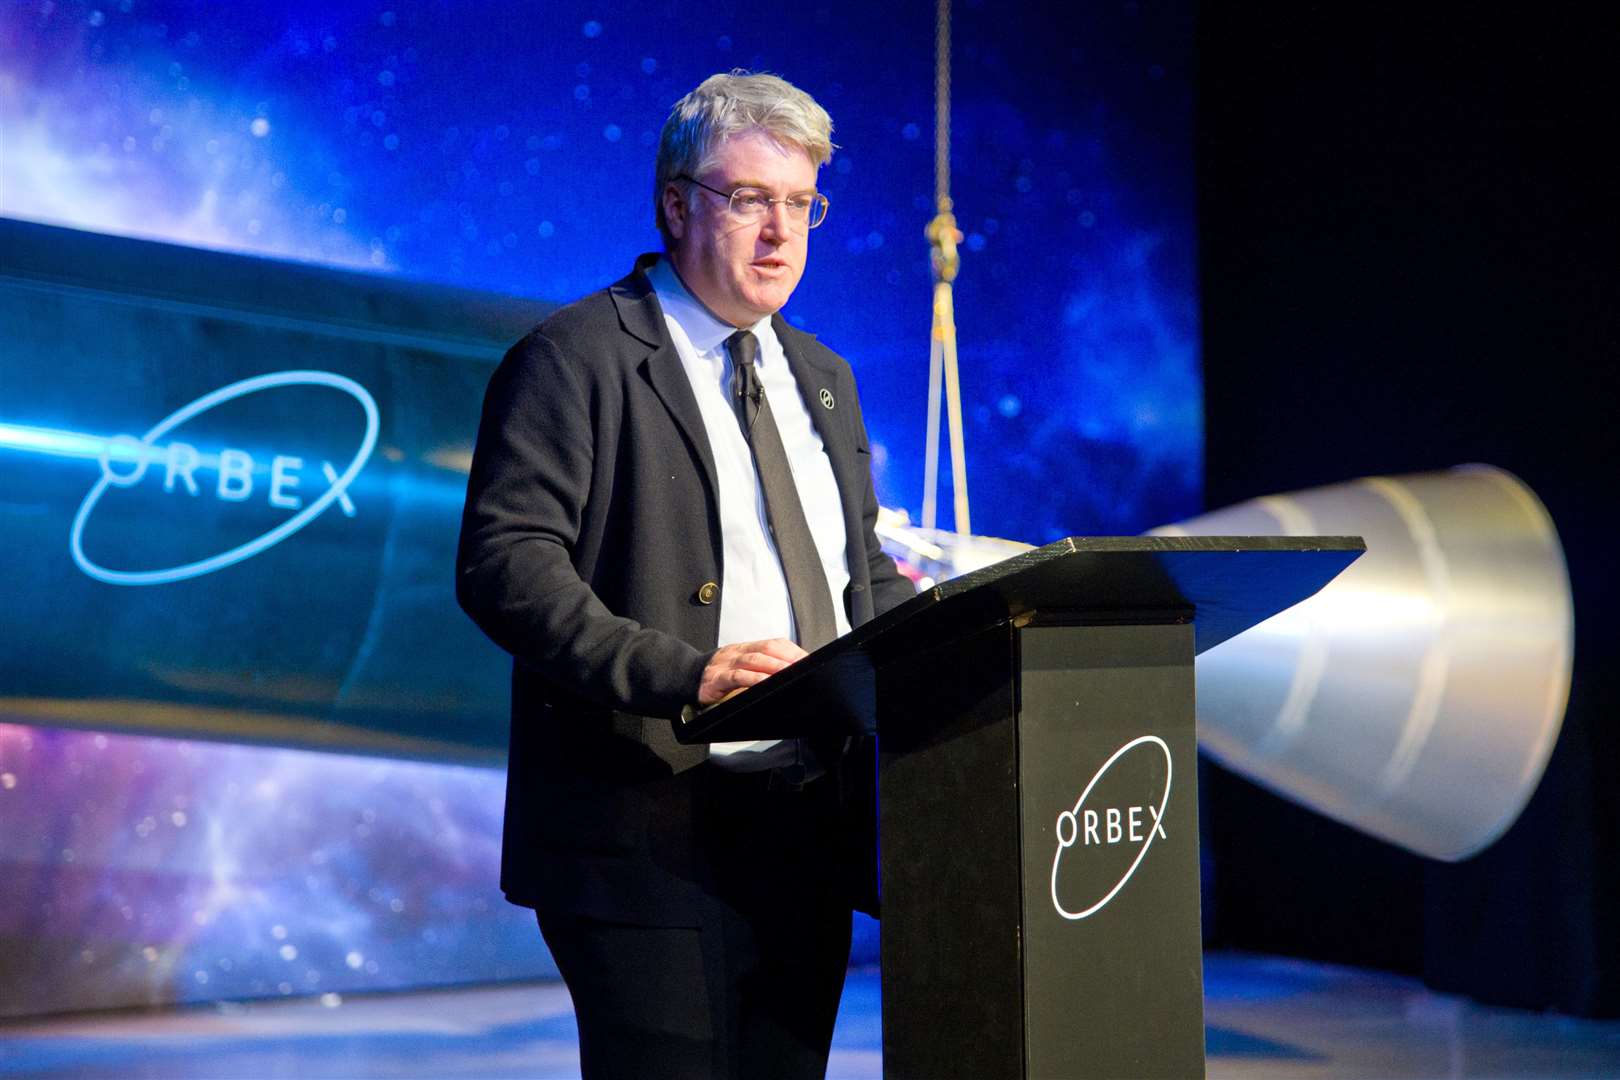 Chris Larmour has been the leading voice for Orbex as it developed its plans to launch from Space Hub Sutherland. Picture: Daniel Forsyth